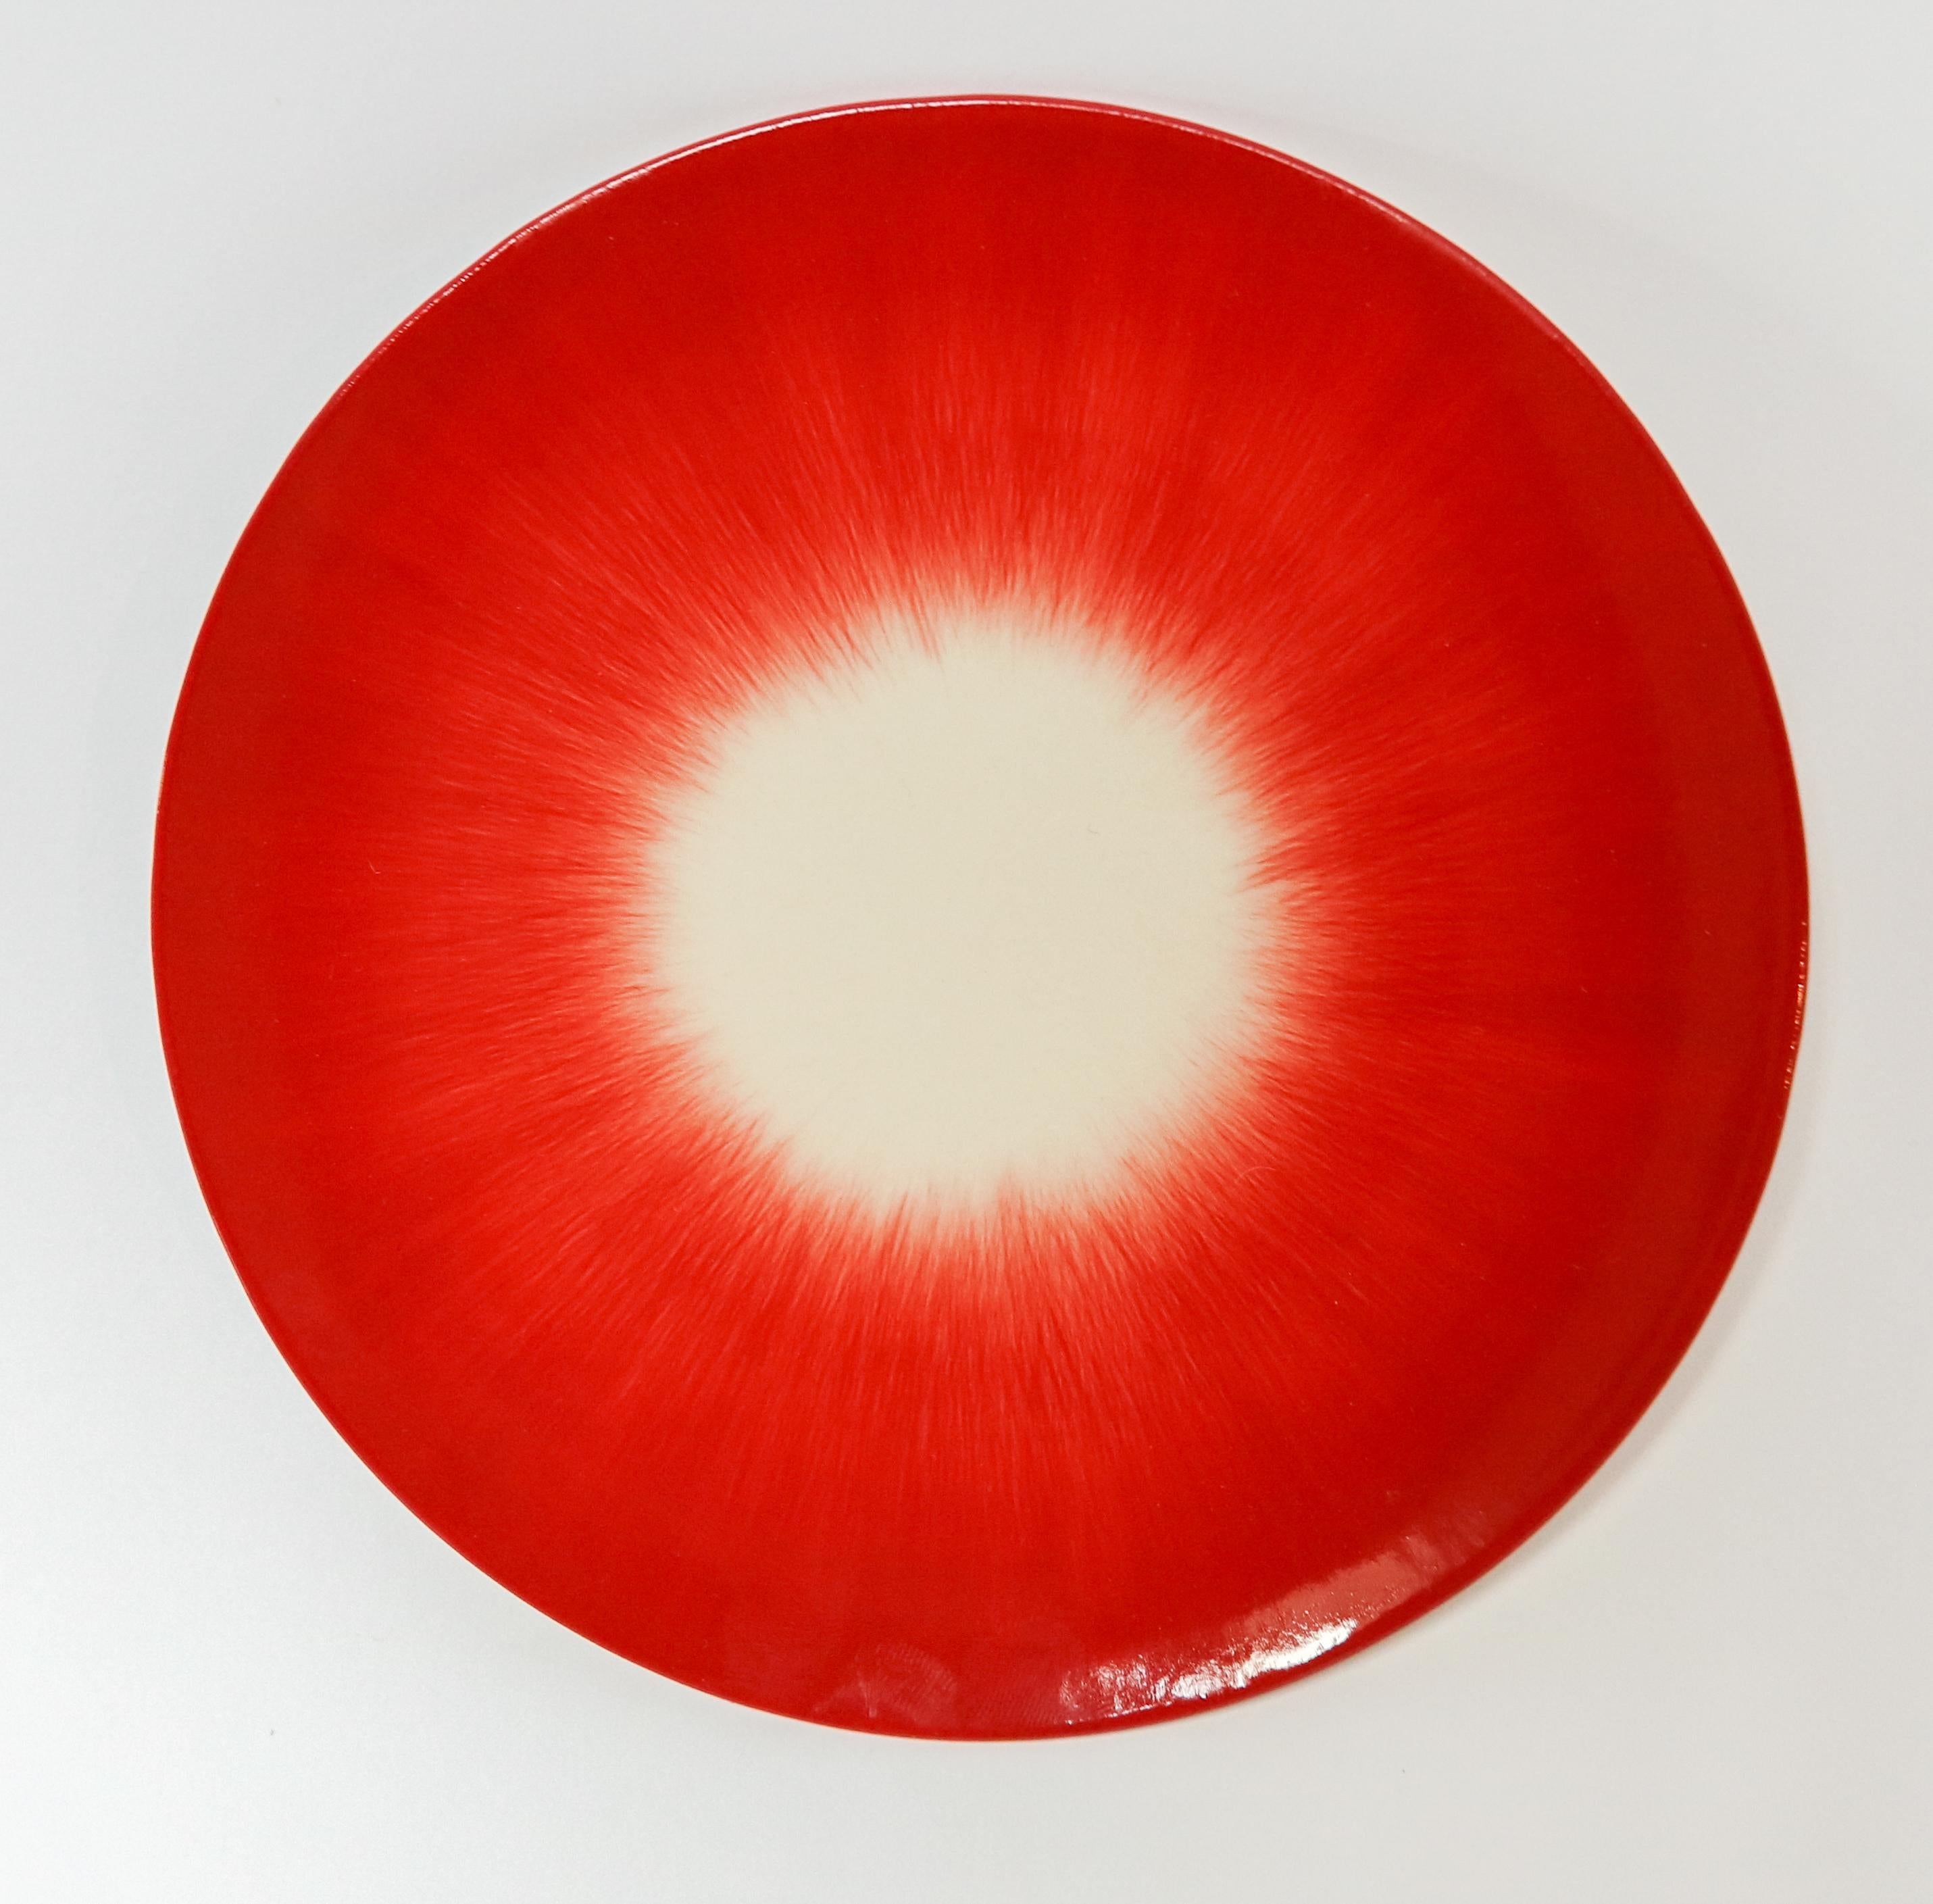 Contemporary Ann Demeulemeester for Serax Dé Dessert Plate in Off White / Red